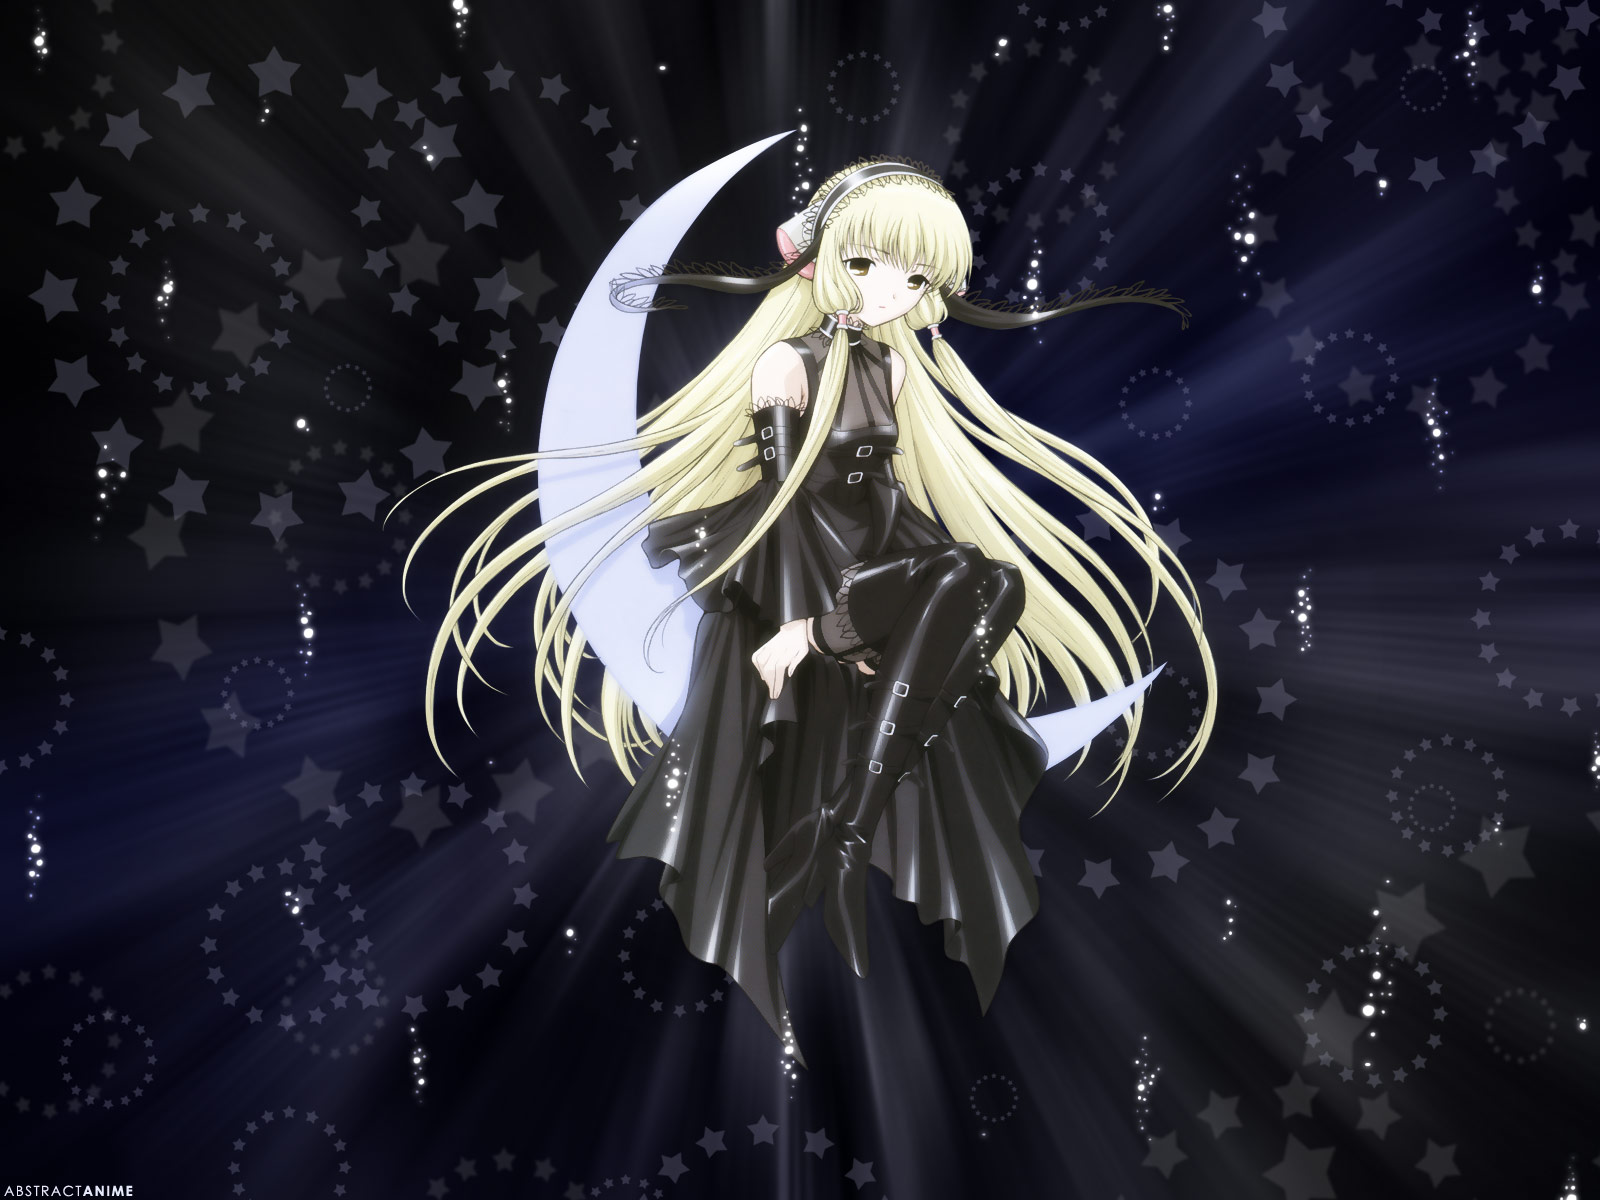 chobits wallpaper,cg artwork,anime,fictional character,illustration,space